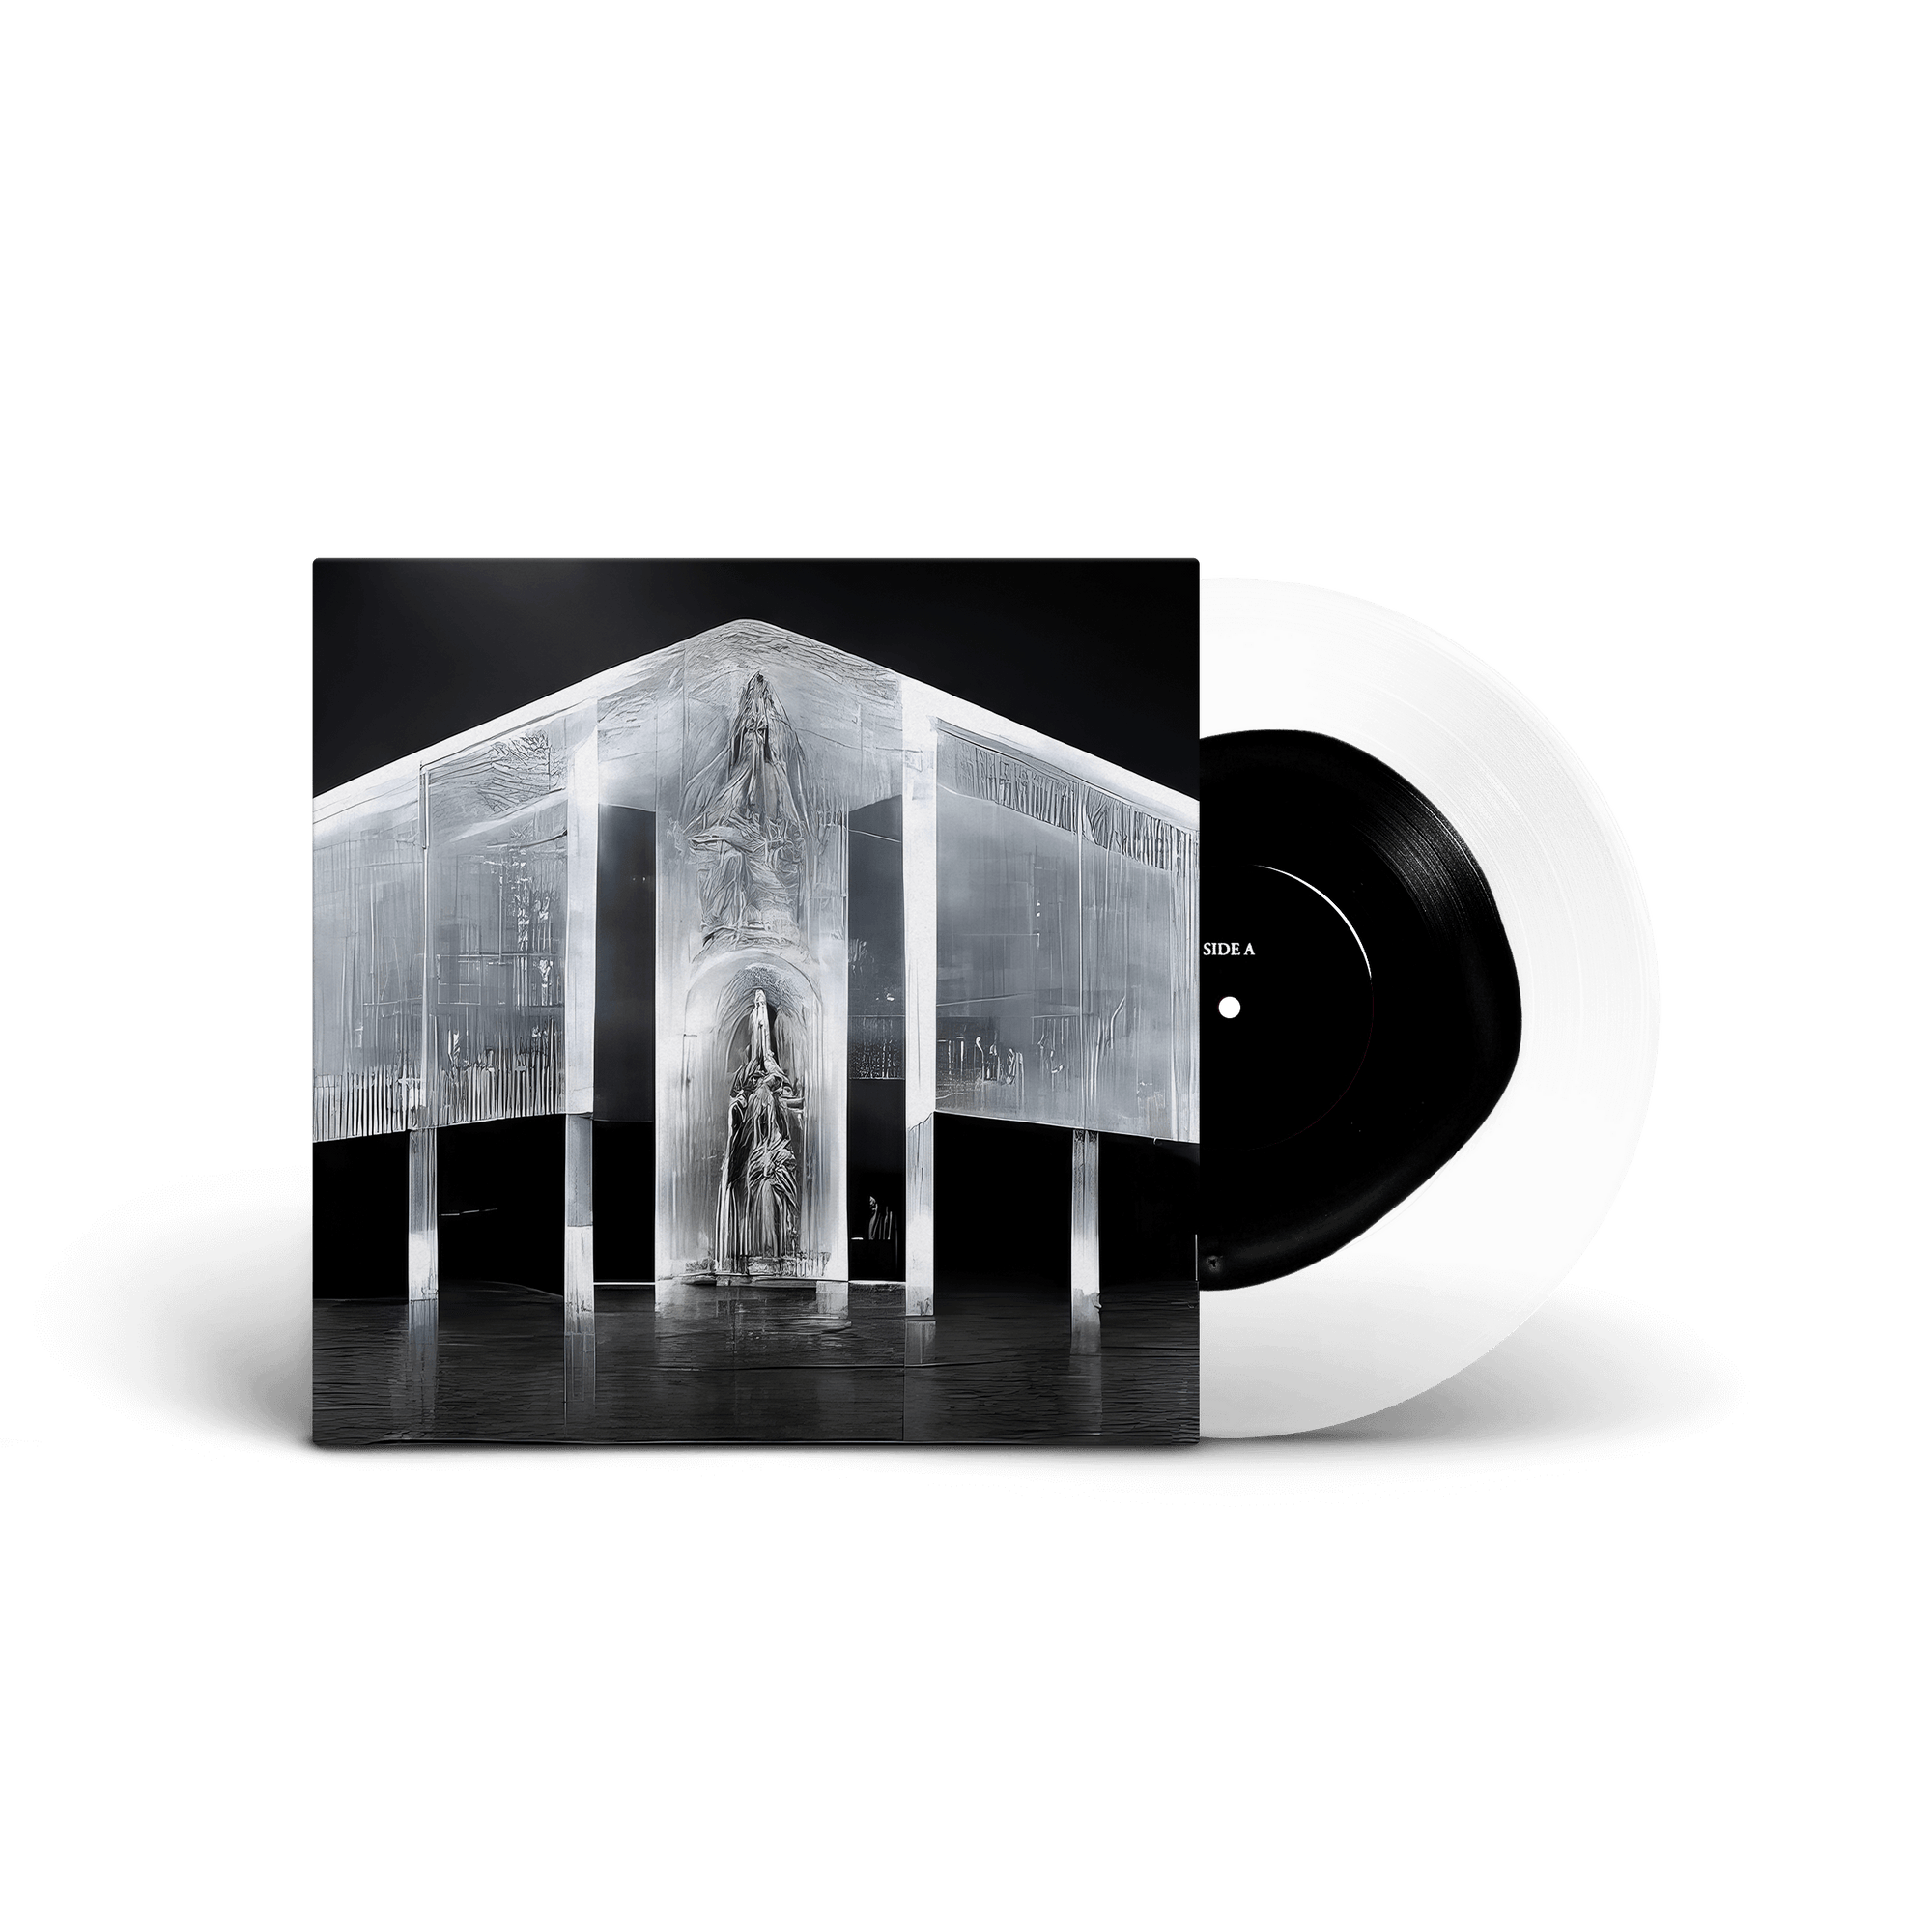 GLASSING // FROM THE OTHER SIDE OF THE MIRROR - NOMINAL WILL EDITION VINYL (LP)